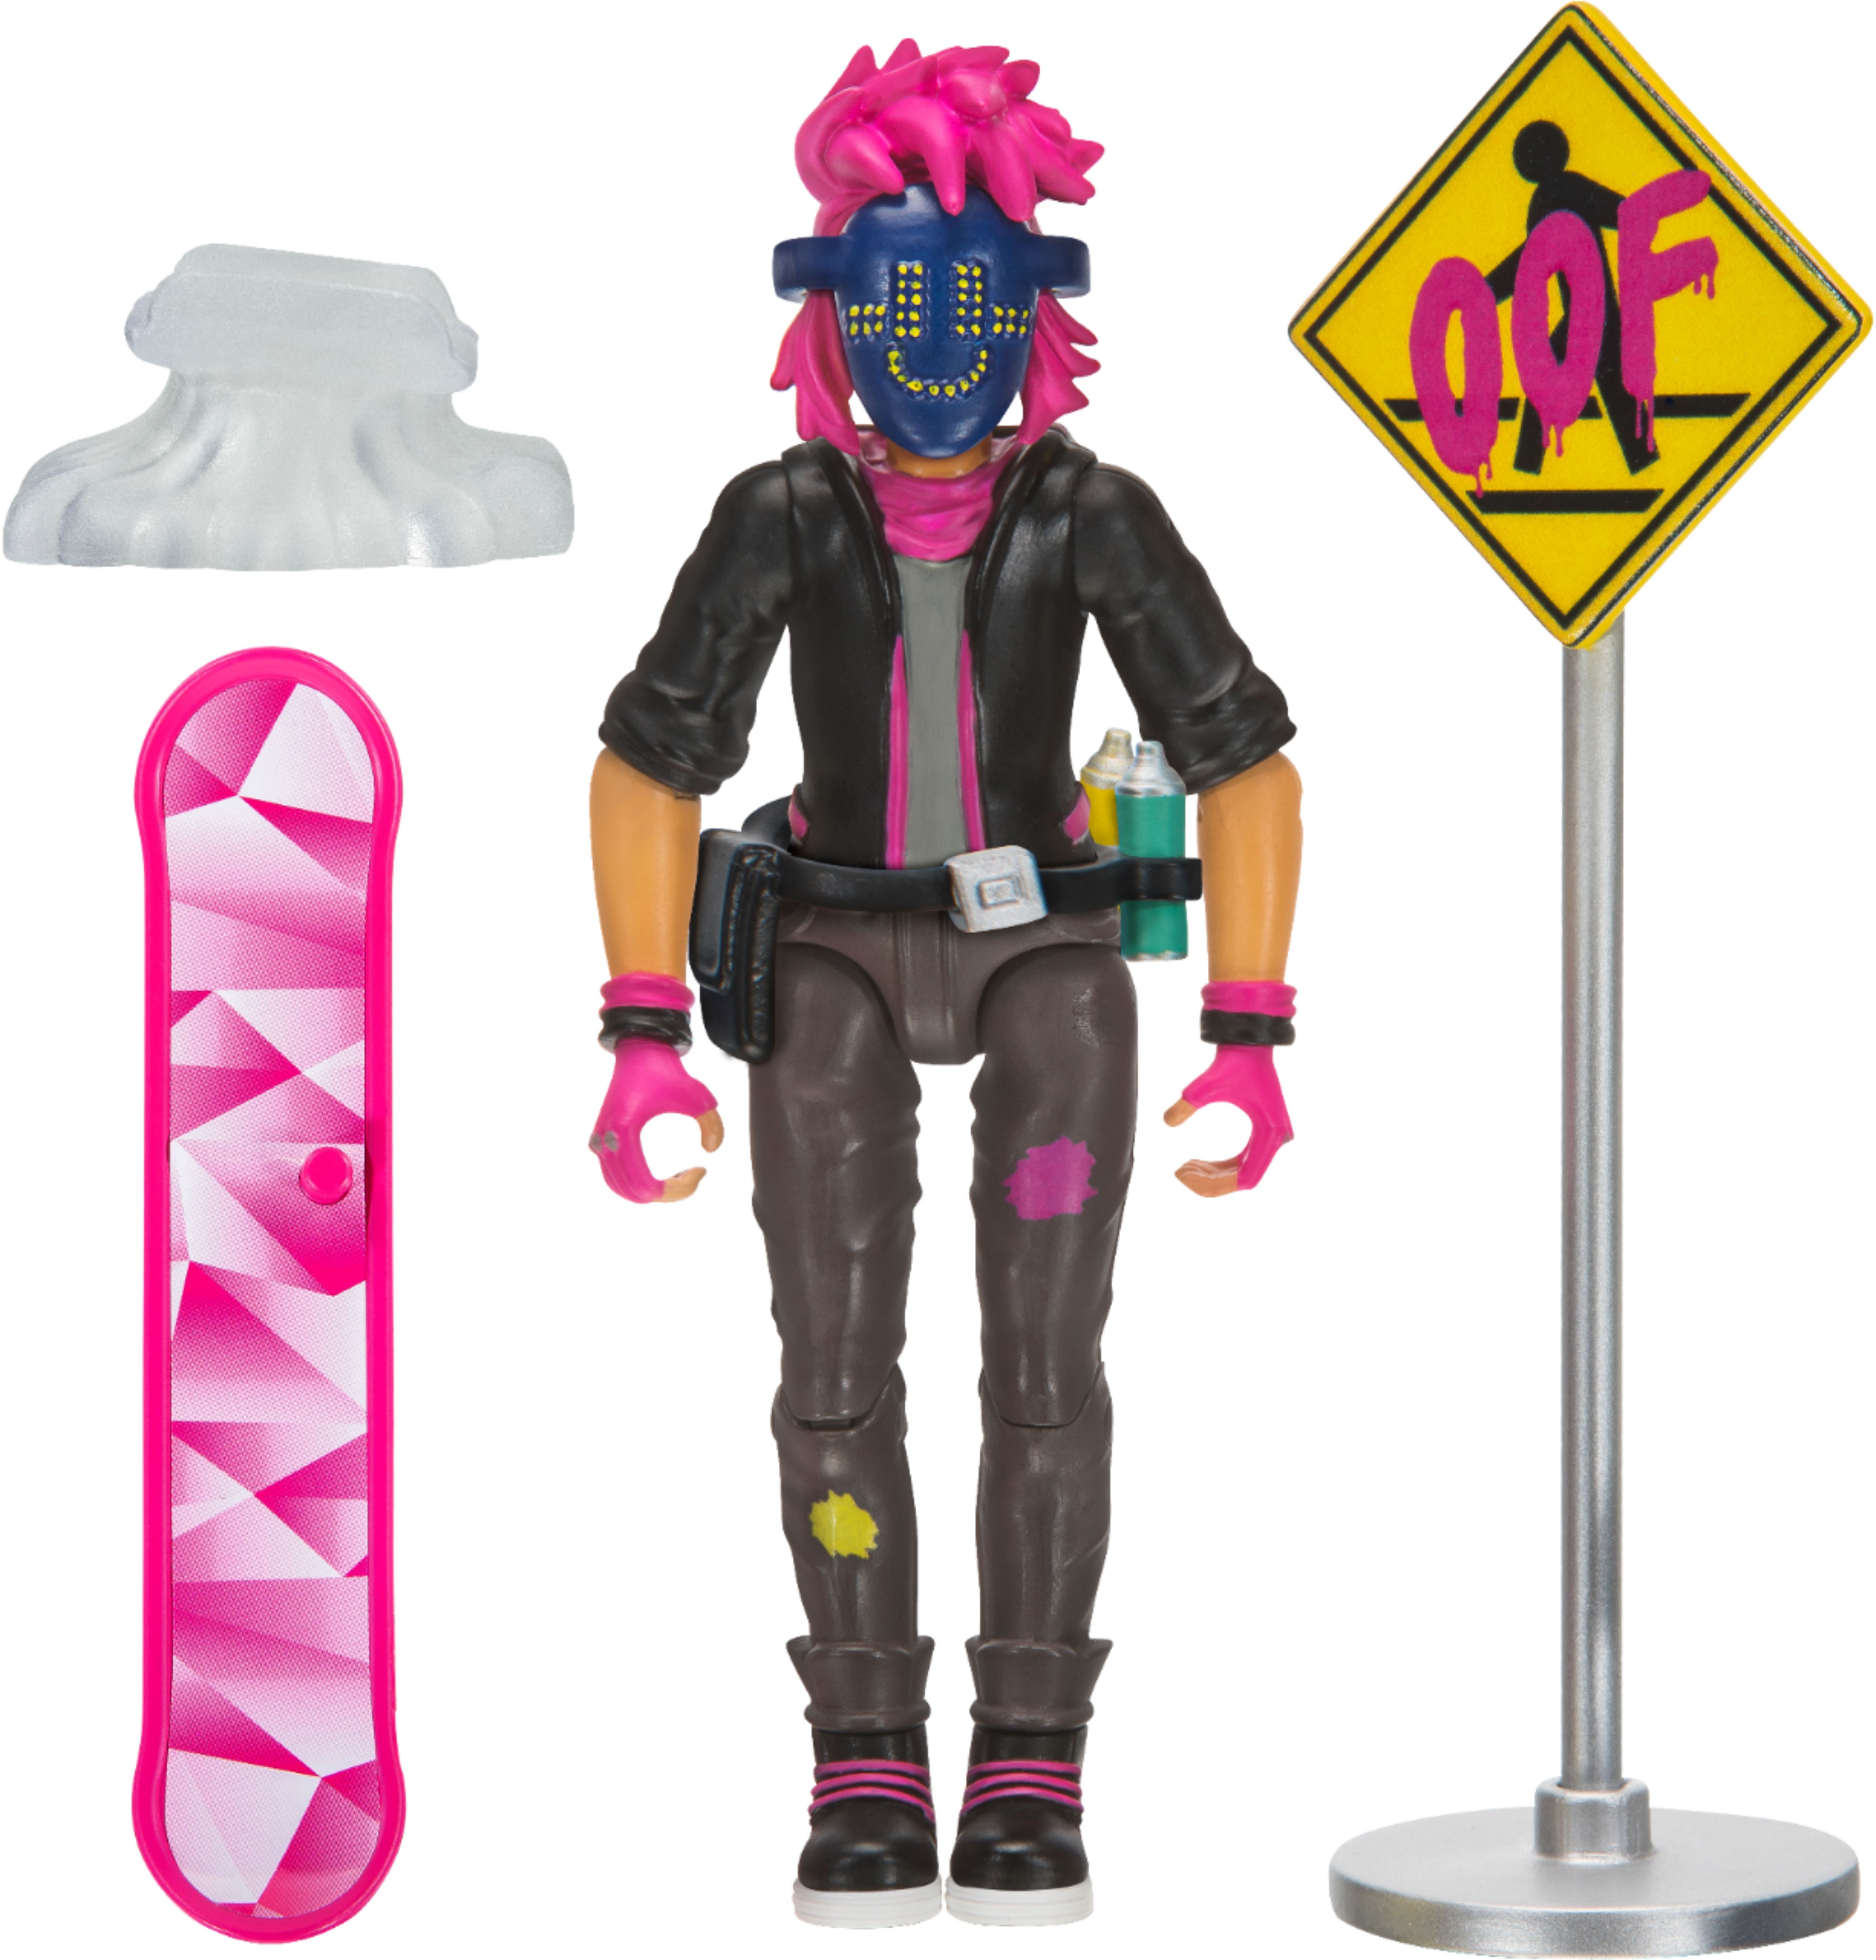 Jazwares Roblox Imagination Articulated Figure Styles May Vary Rob0268 Best Buy - roblox figure multipack styles may vary roblox